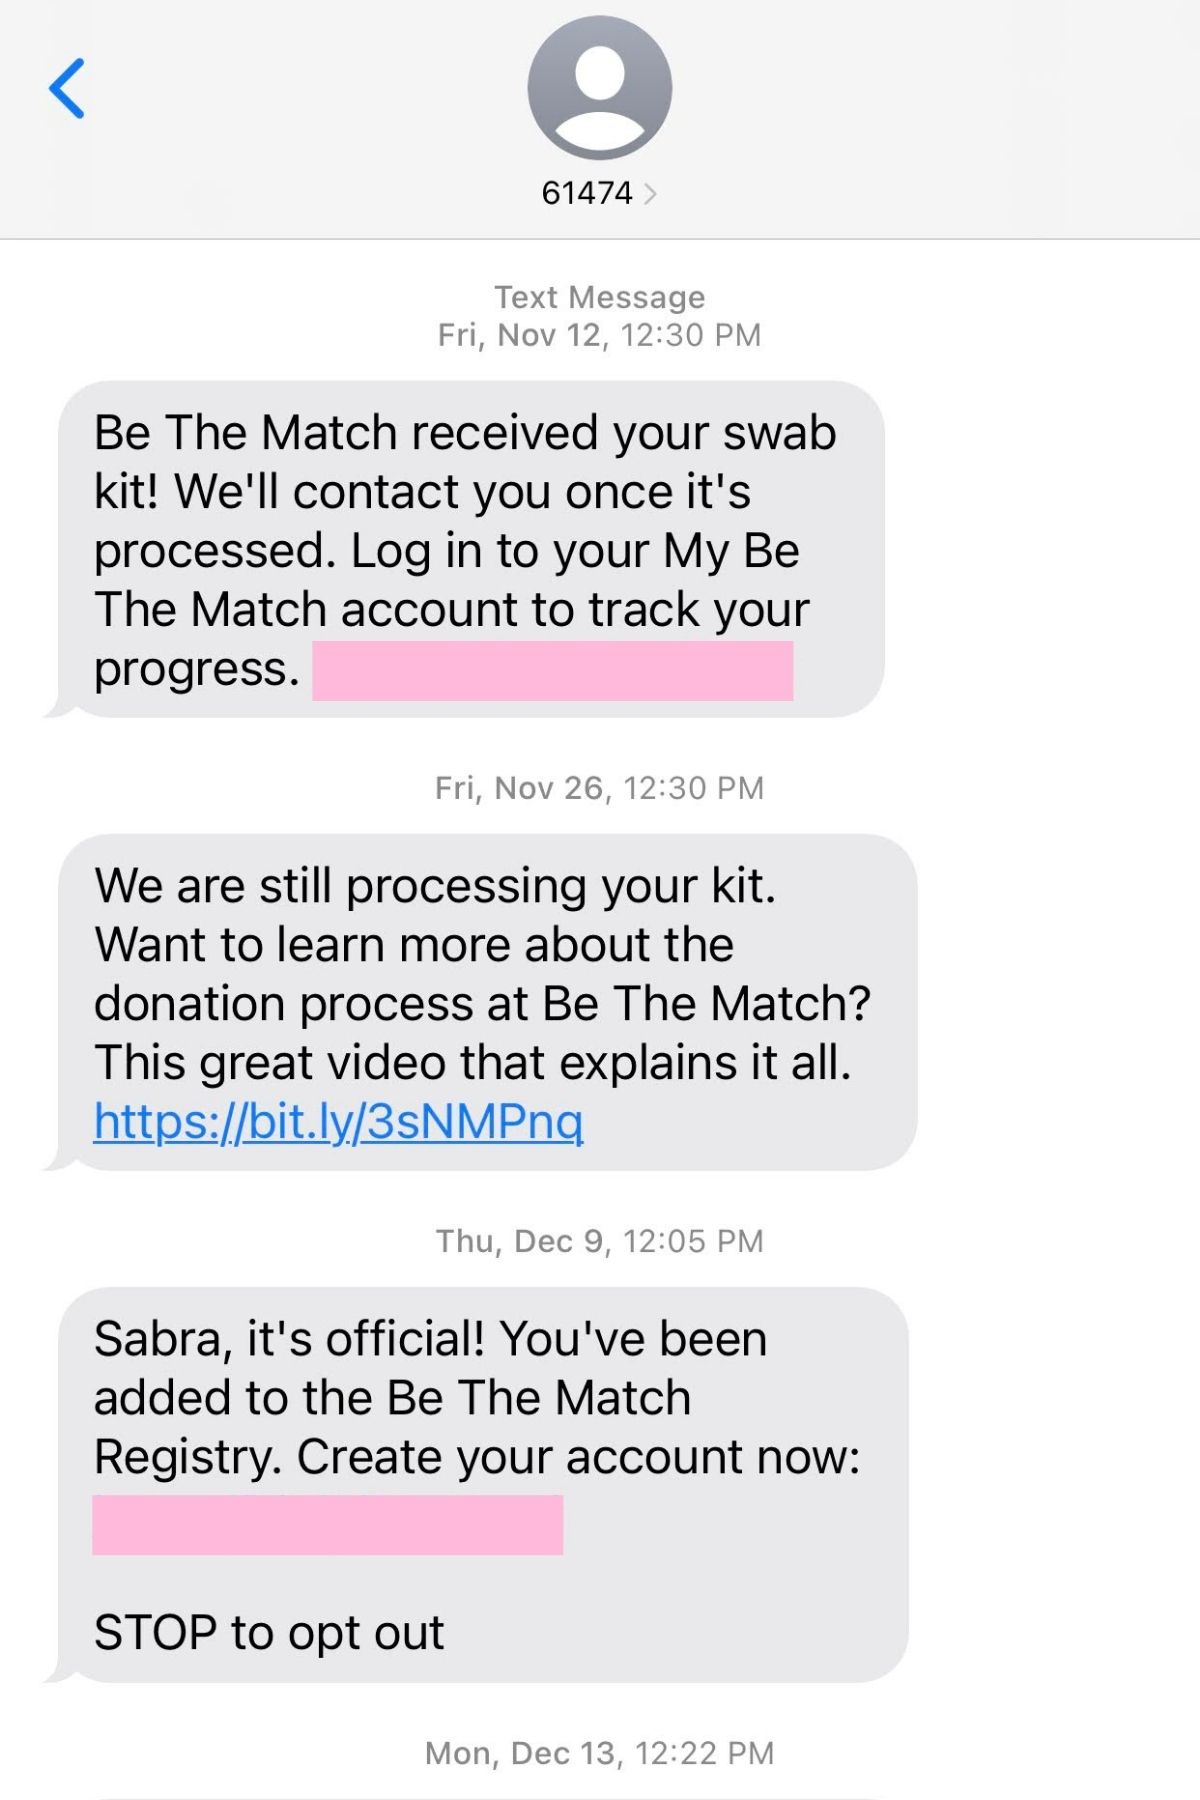 A text message thread from Be the Match